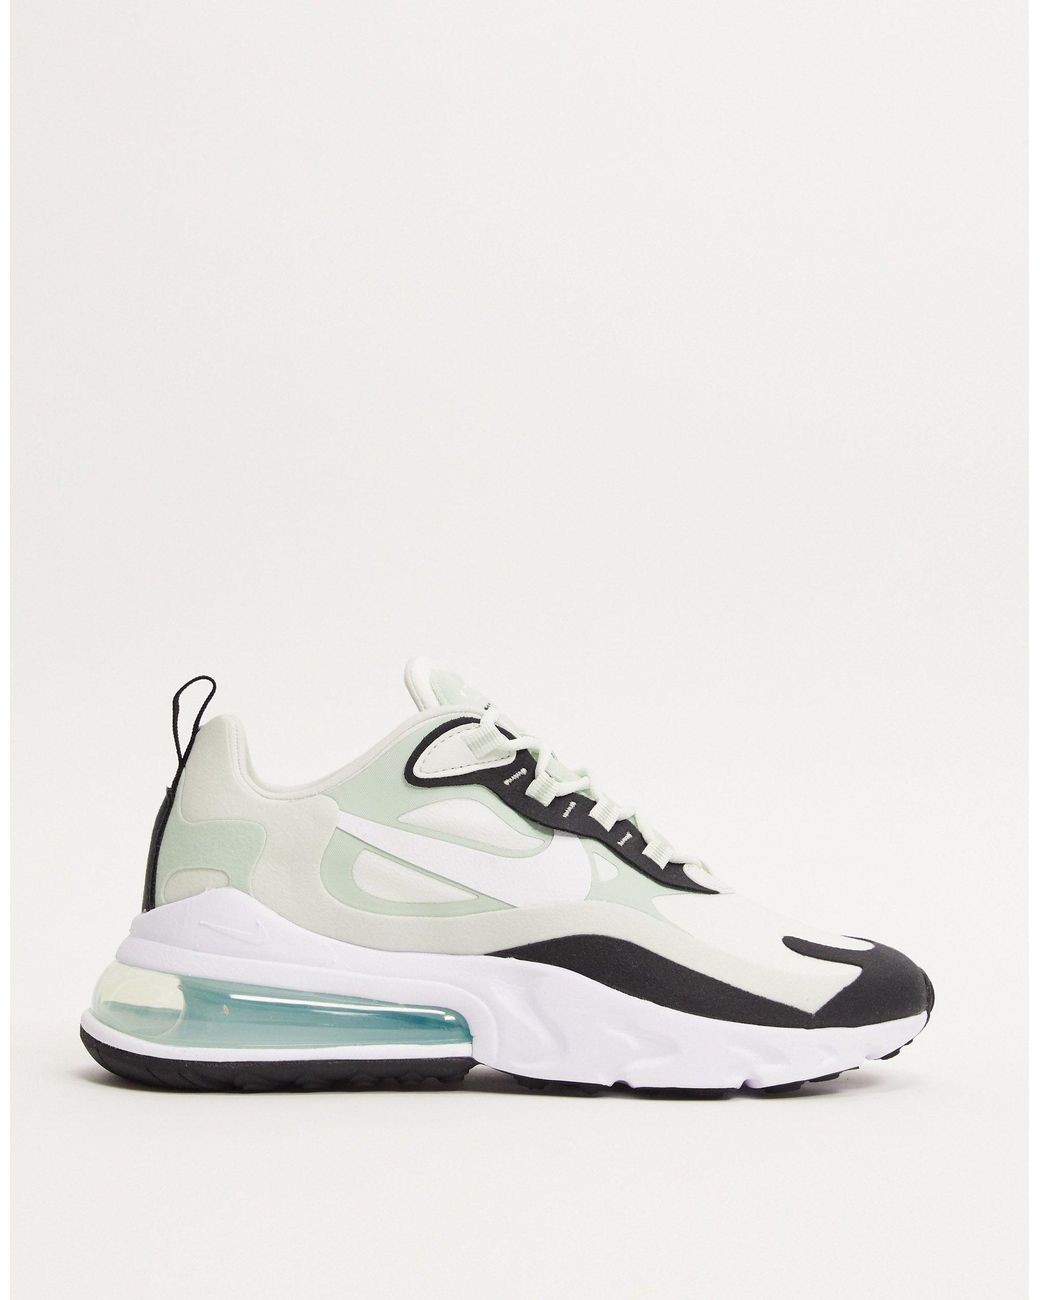 Nike Air Max 270 React Mint Green Sneakers | Lyst